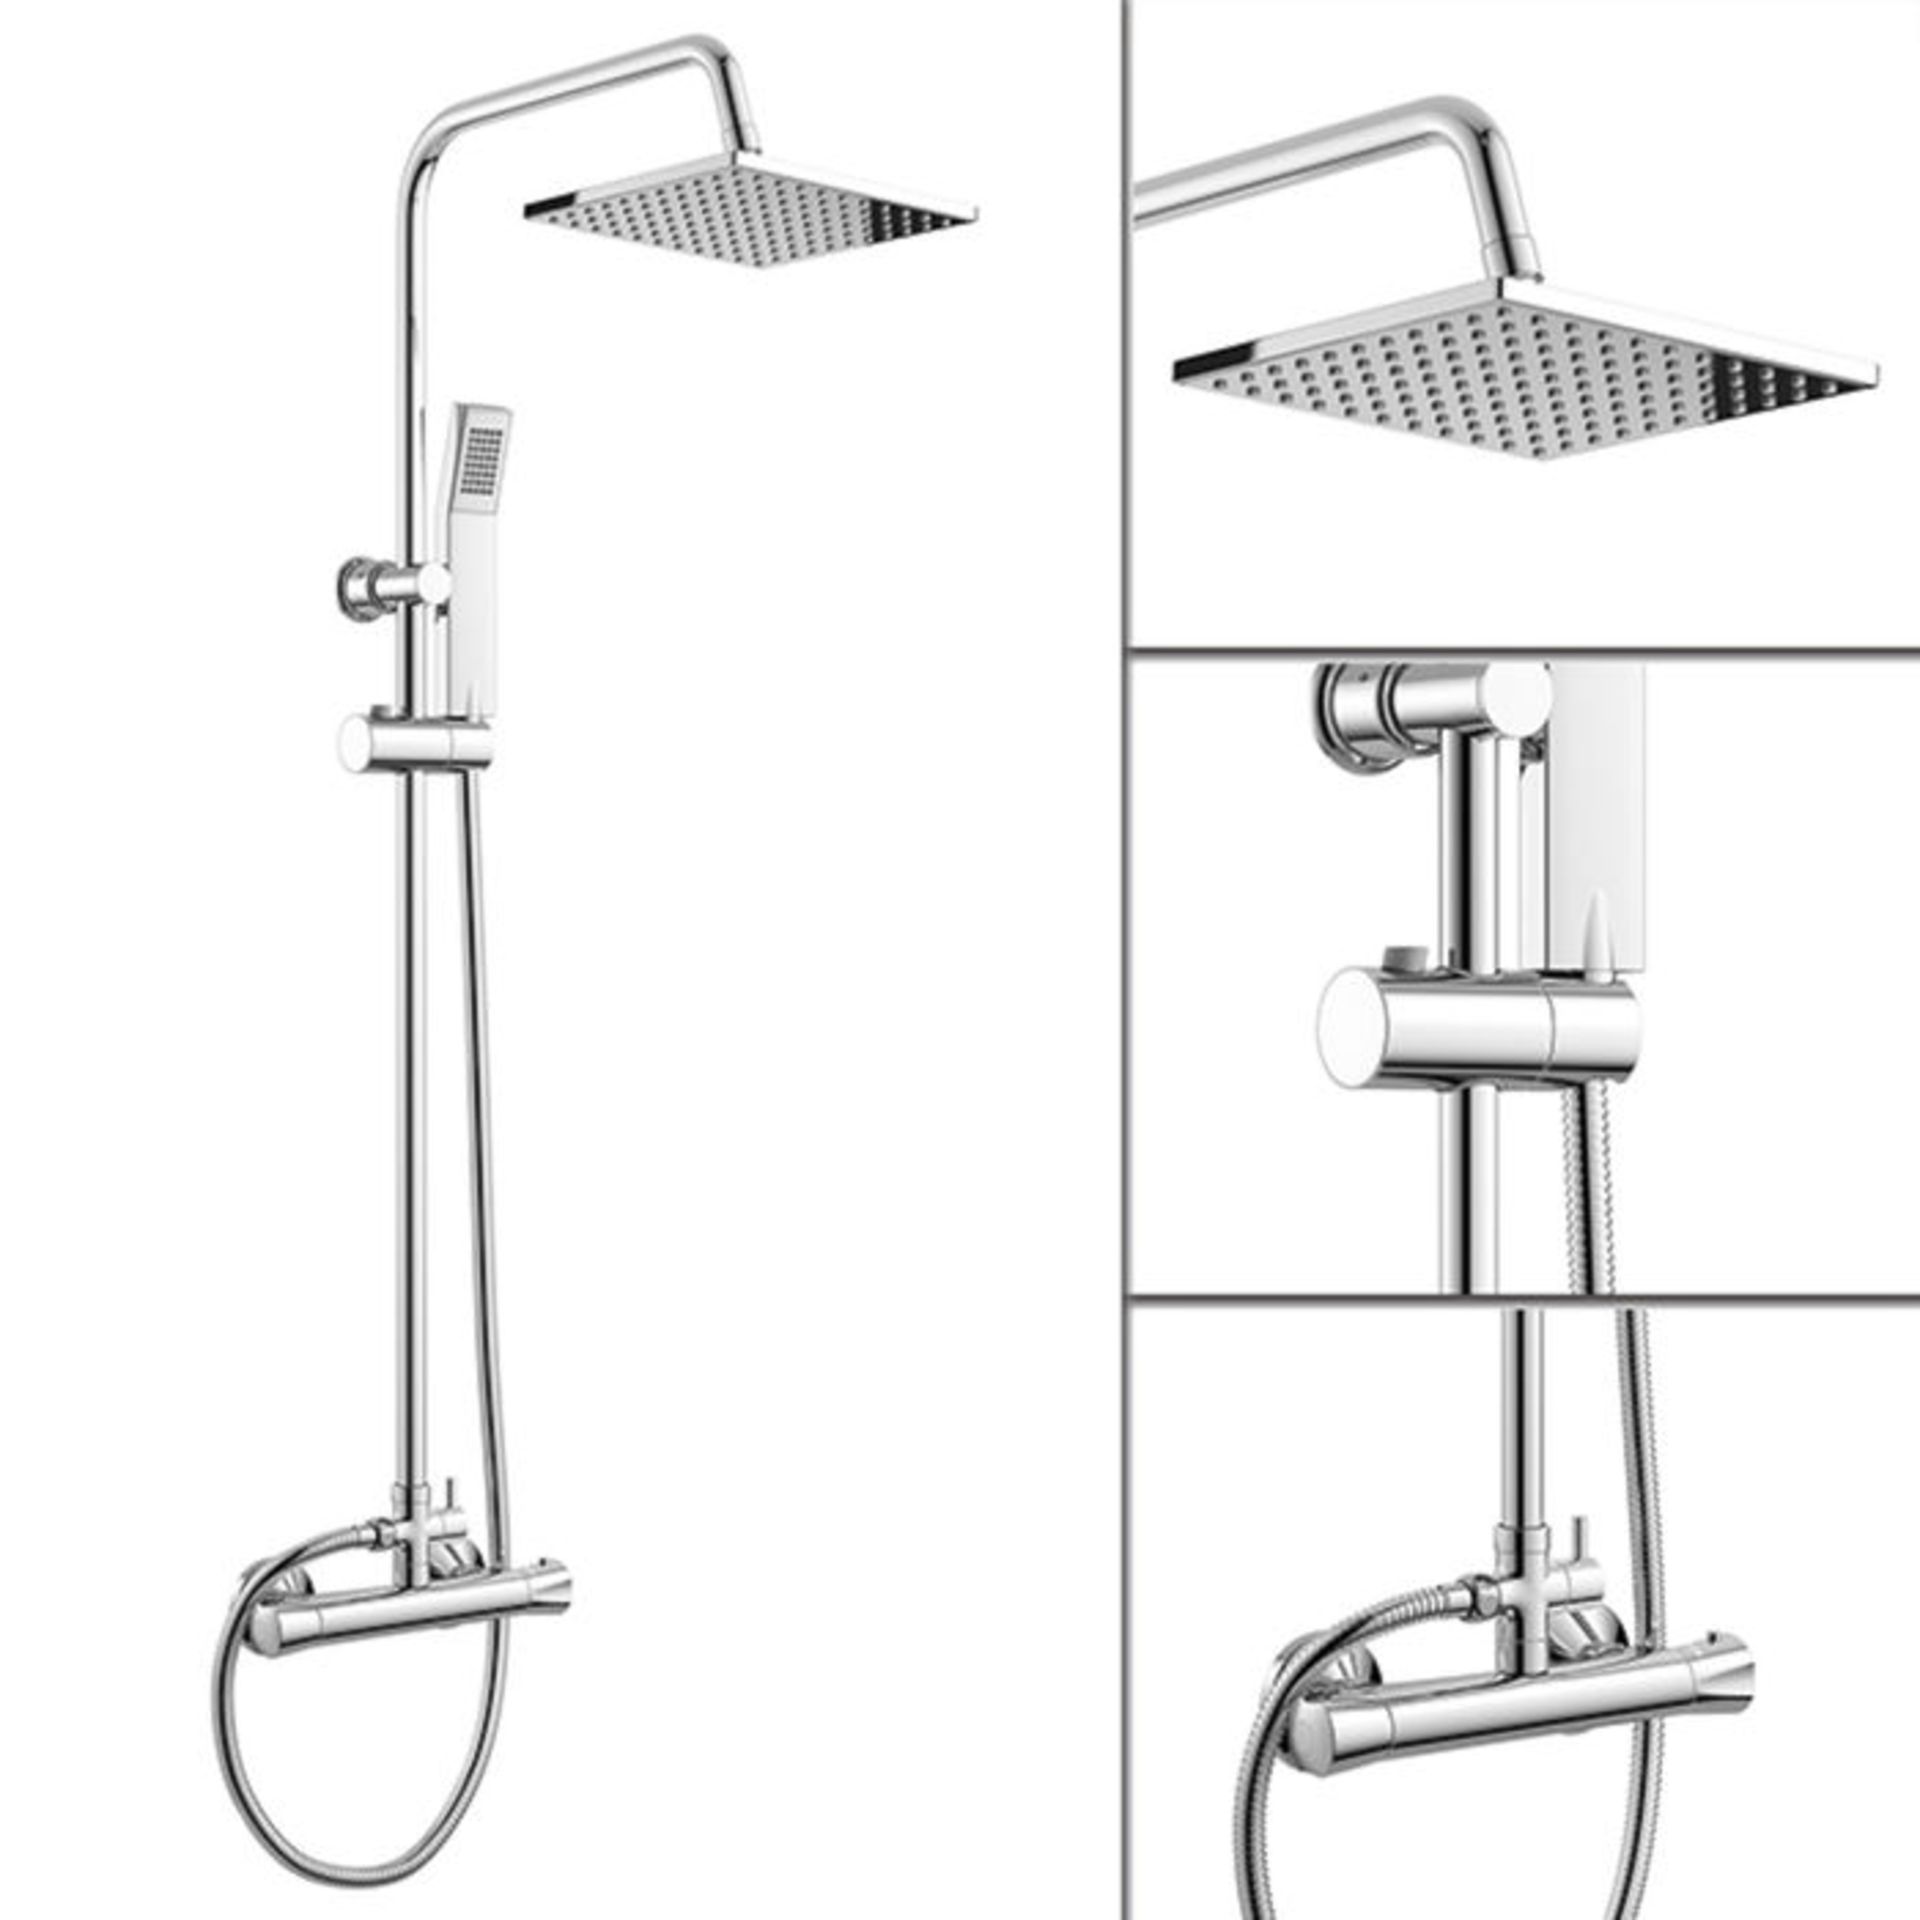 (DW238) Square Exposed Thermostatic Shower Kit & Head. Curved features and contemporary rounded...( - Image 2 of 2